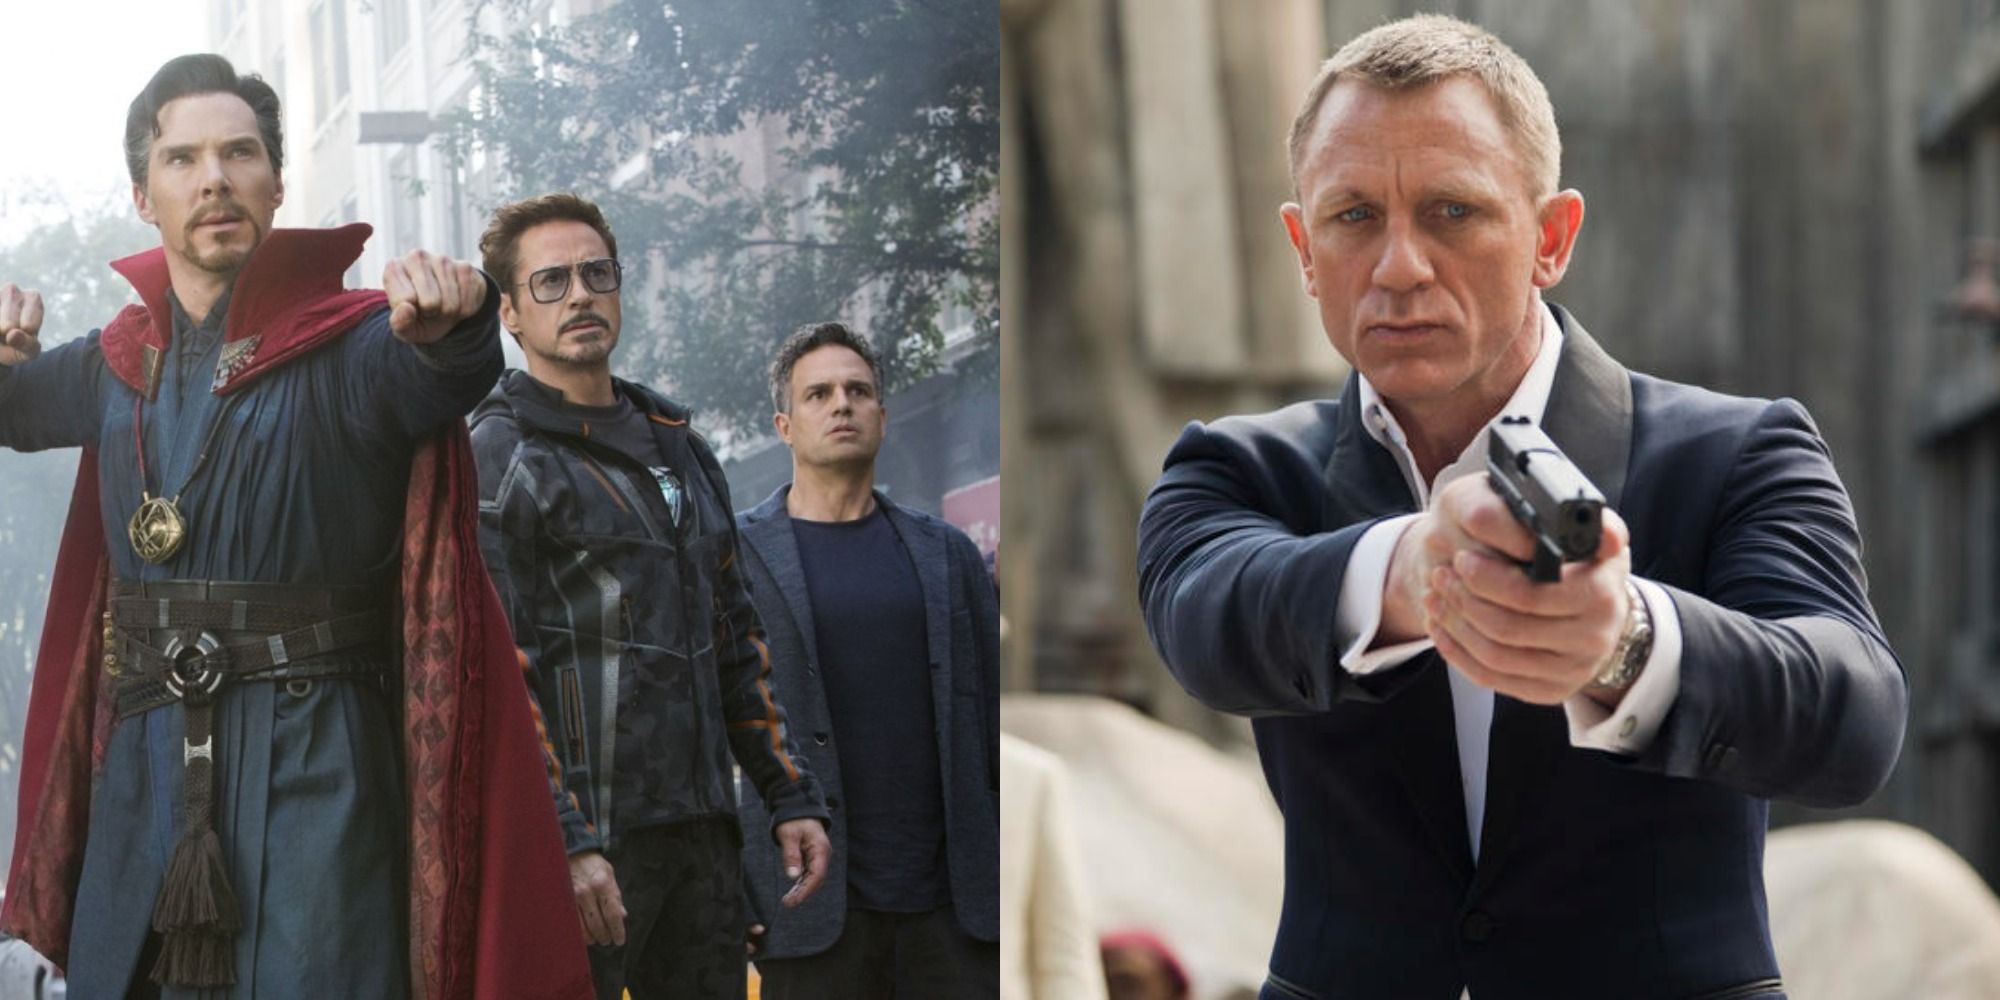 Split image showing Doctor Strange, Tony Stark, and Bruce Banner in Infinity War, and James Bond pointing a gun in Skyfall